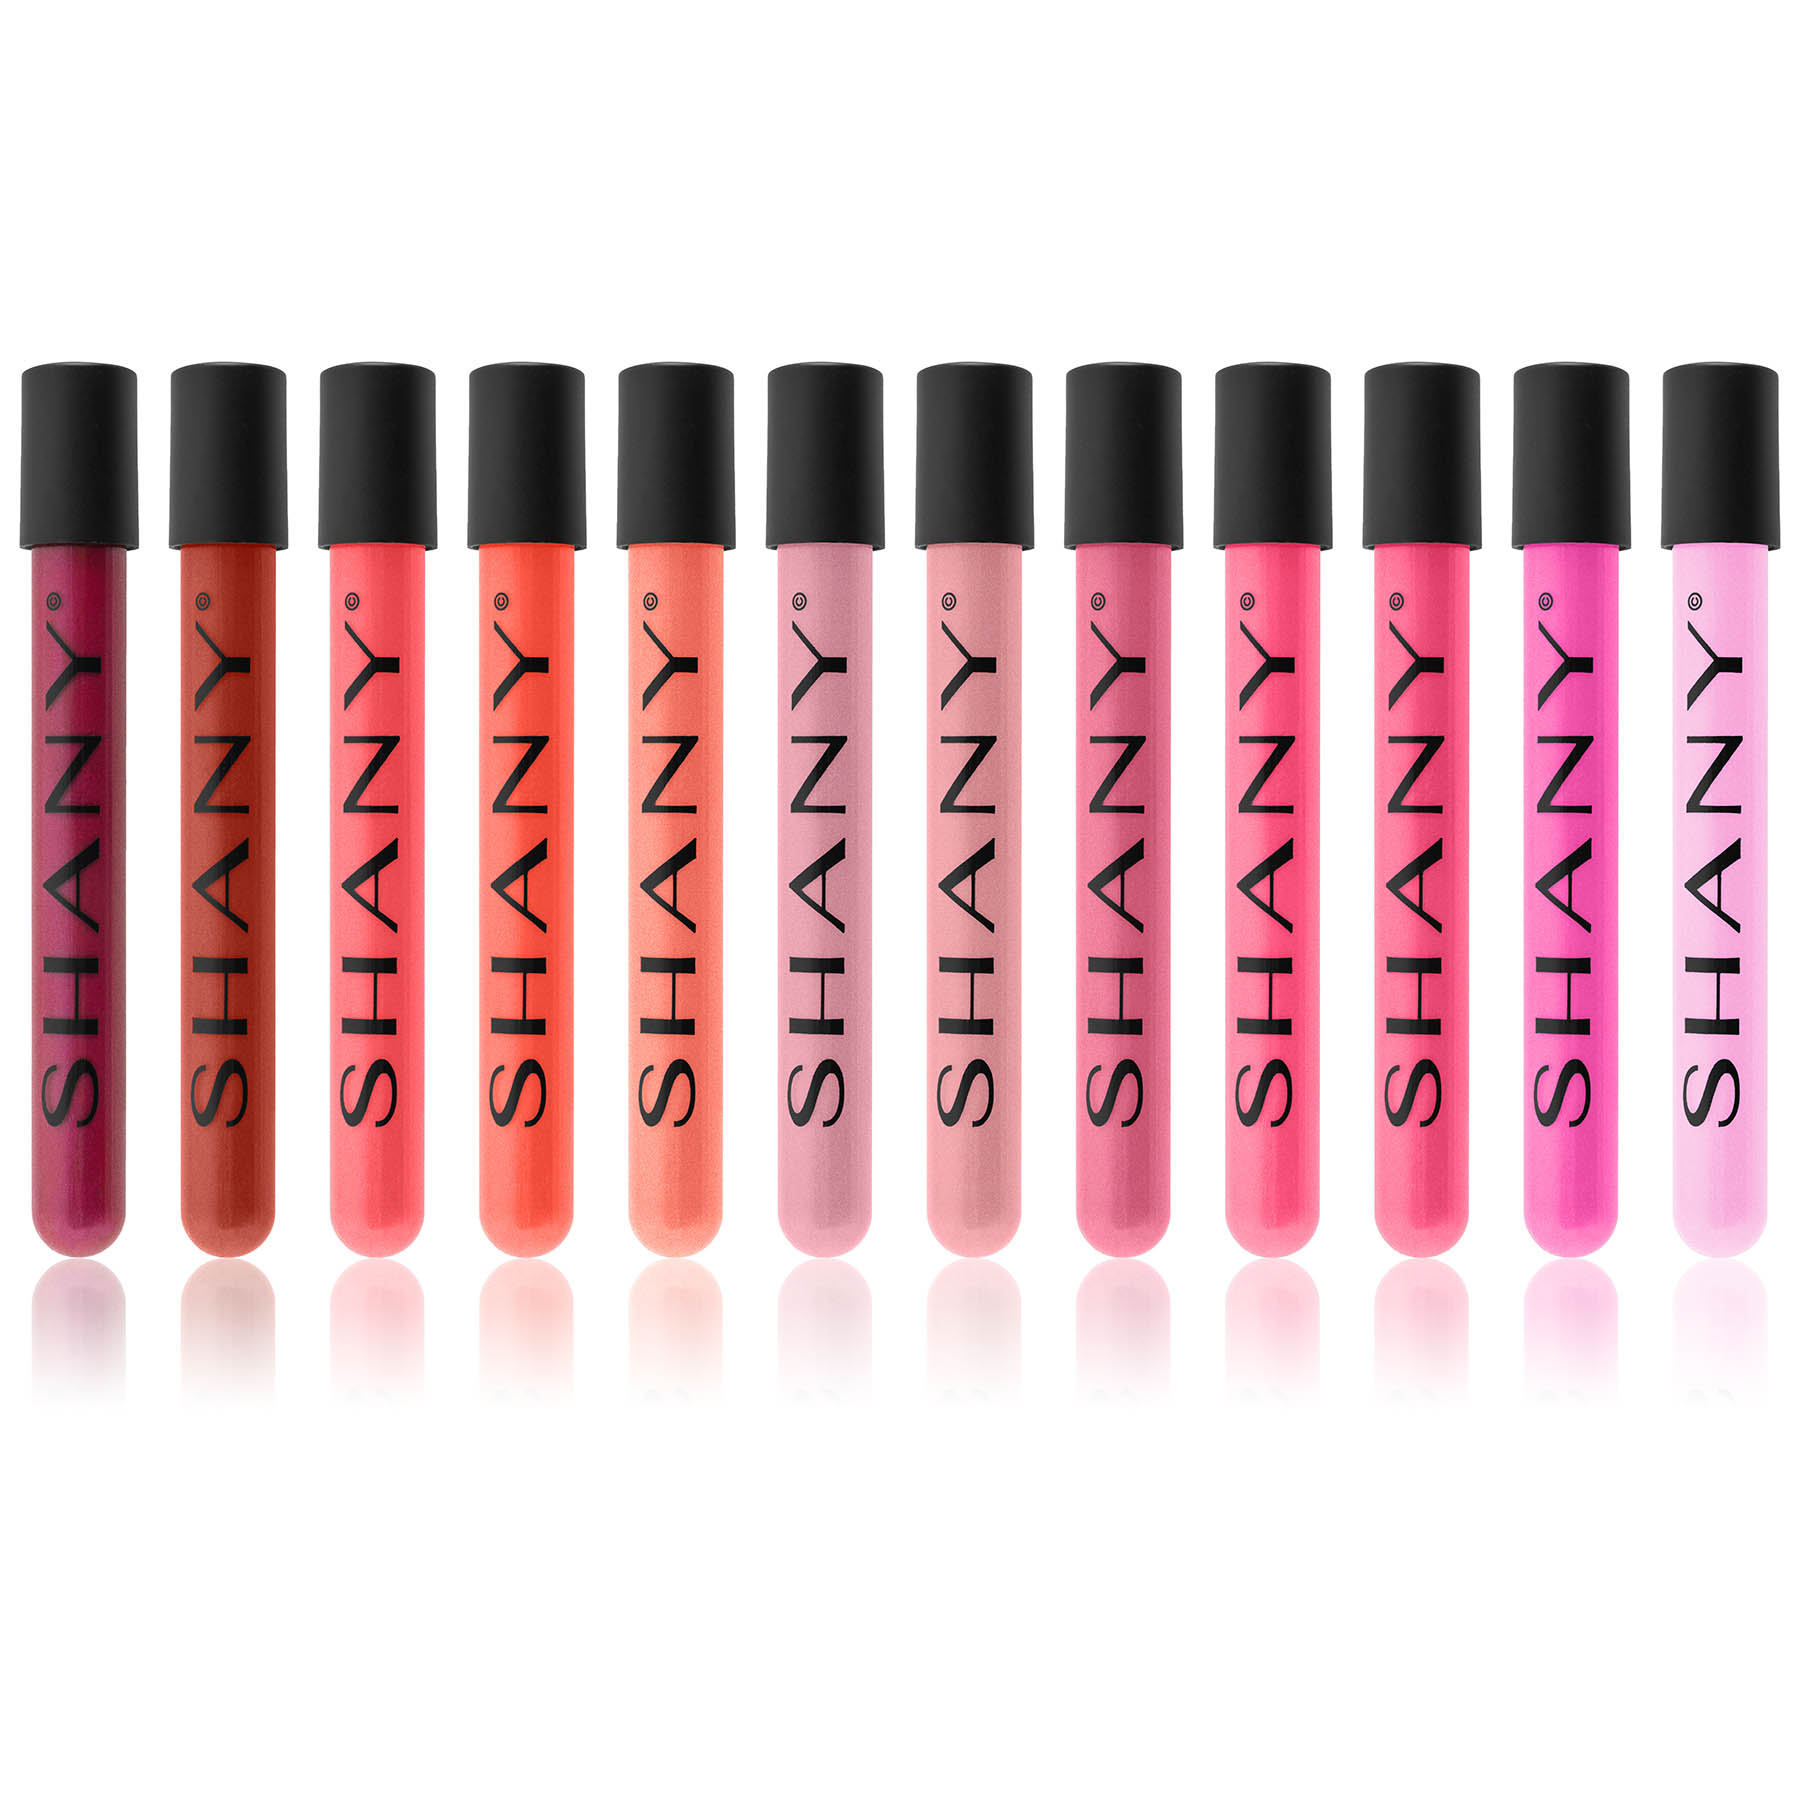 SHANY The Wanted Ones - 12 Piece Lip Gloss Set with Aloe Vera and Vitamin E - image 2 of 5